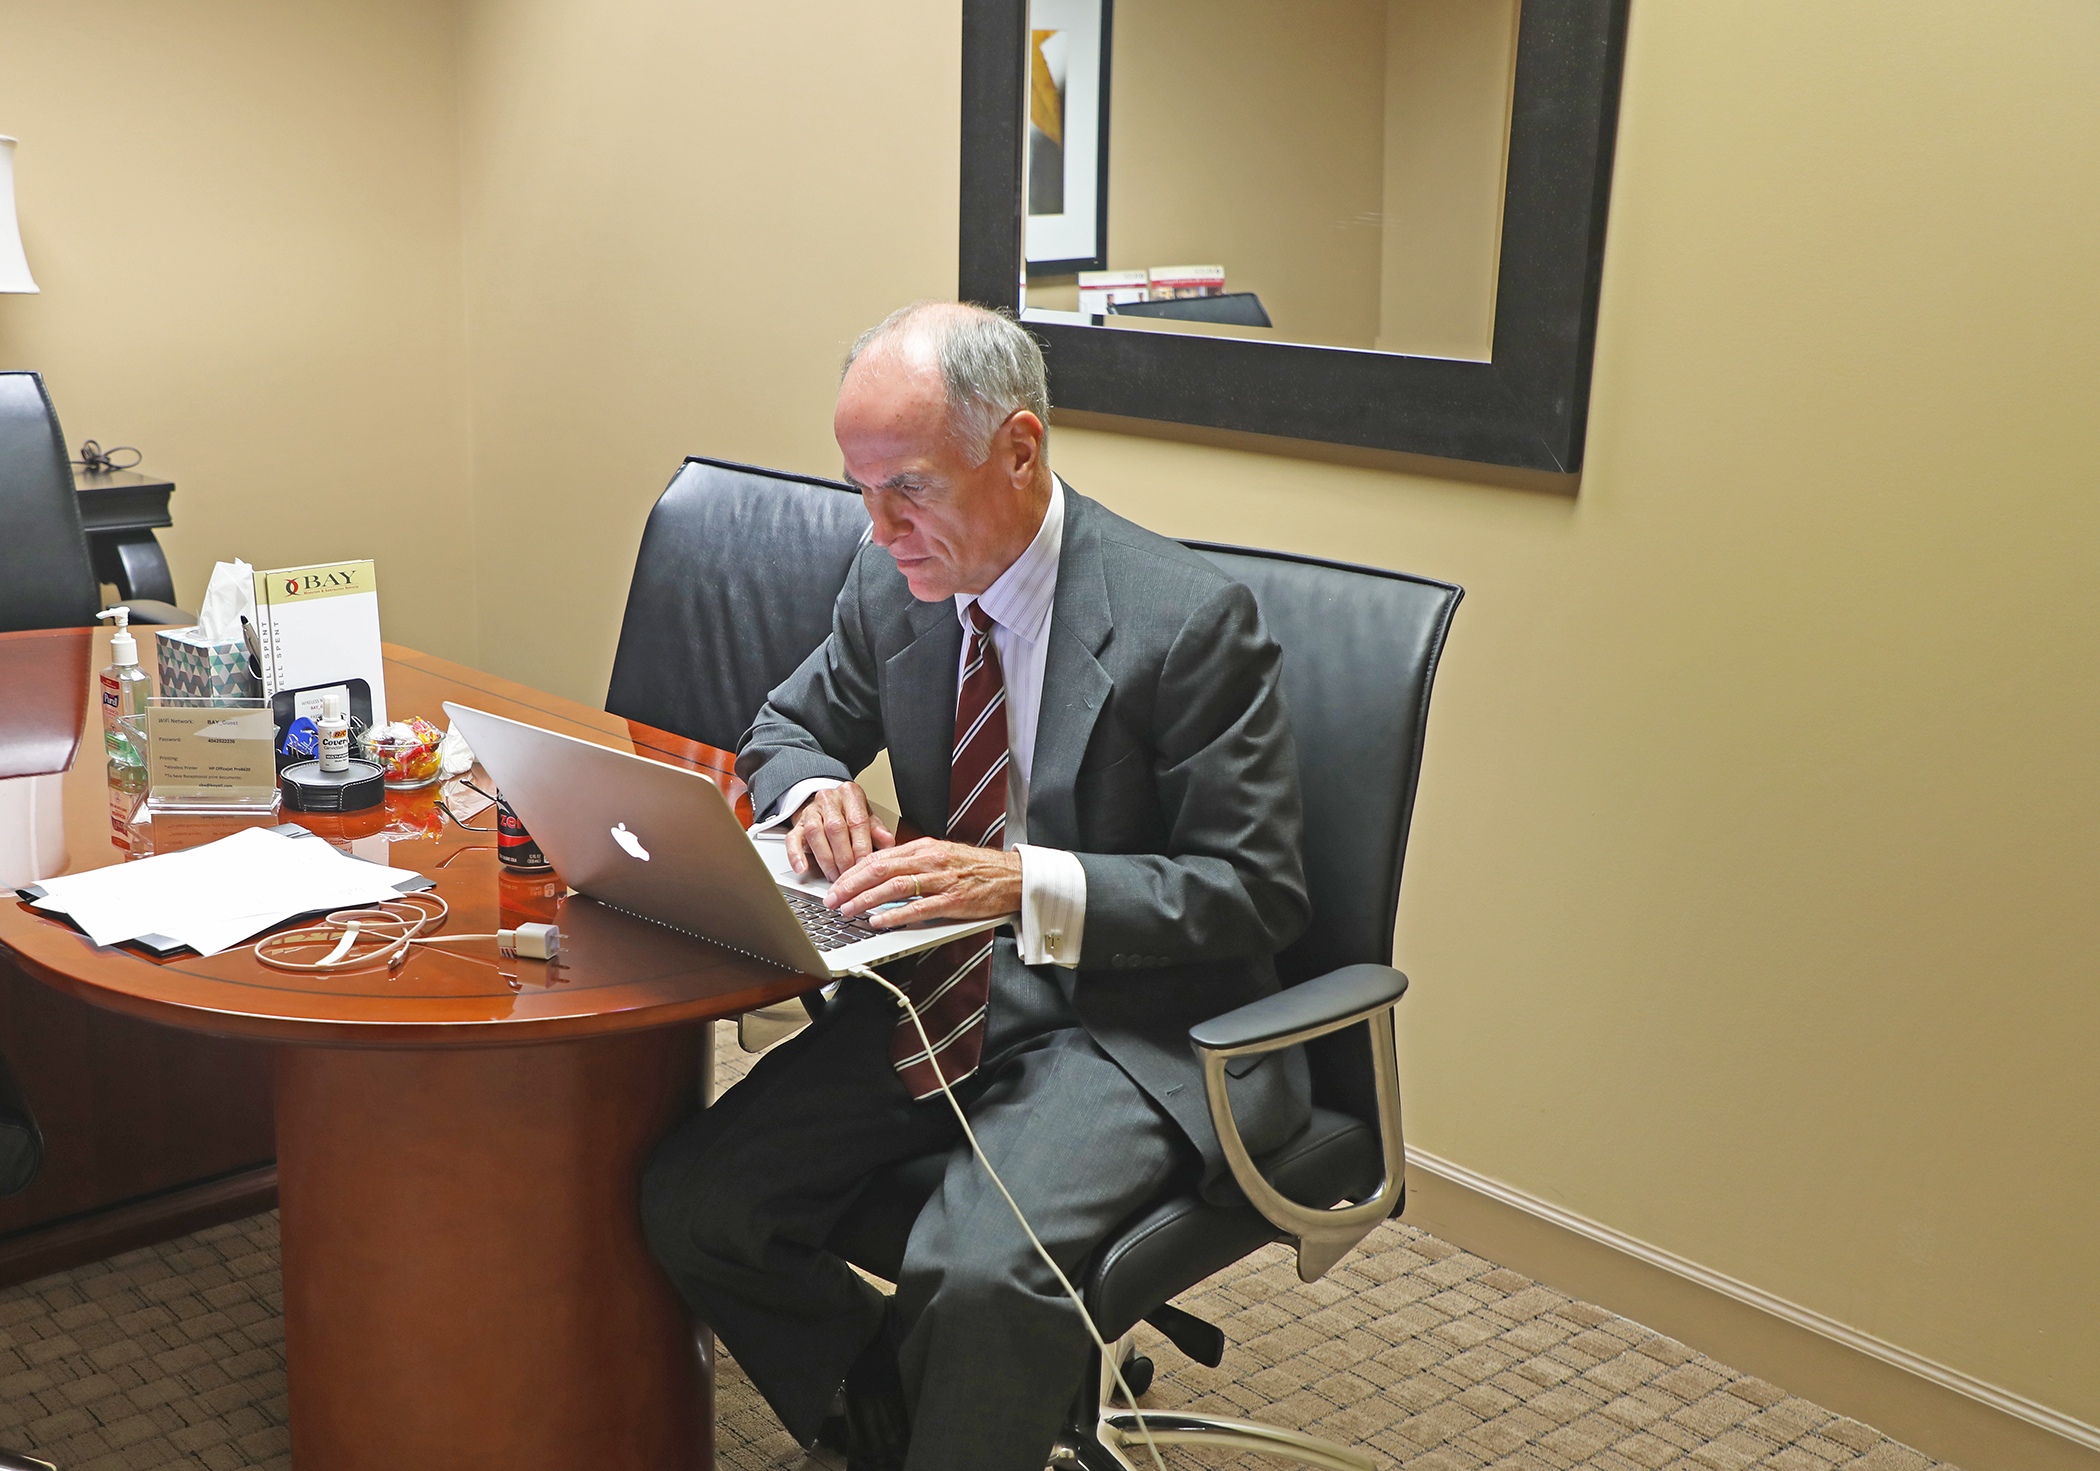 Tom Harper always spends time preparing for each mediation, so he can provide his clients the best and effective experience he can.